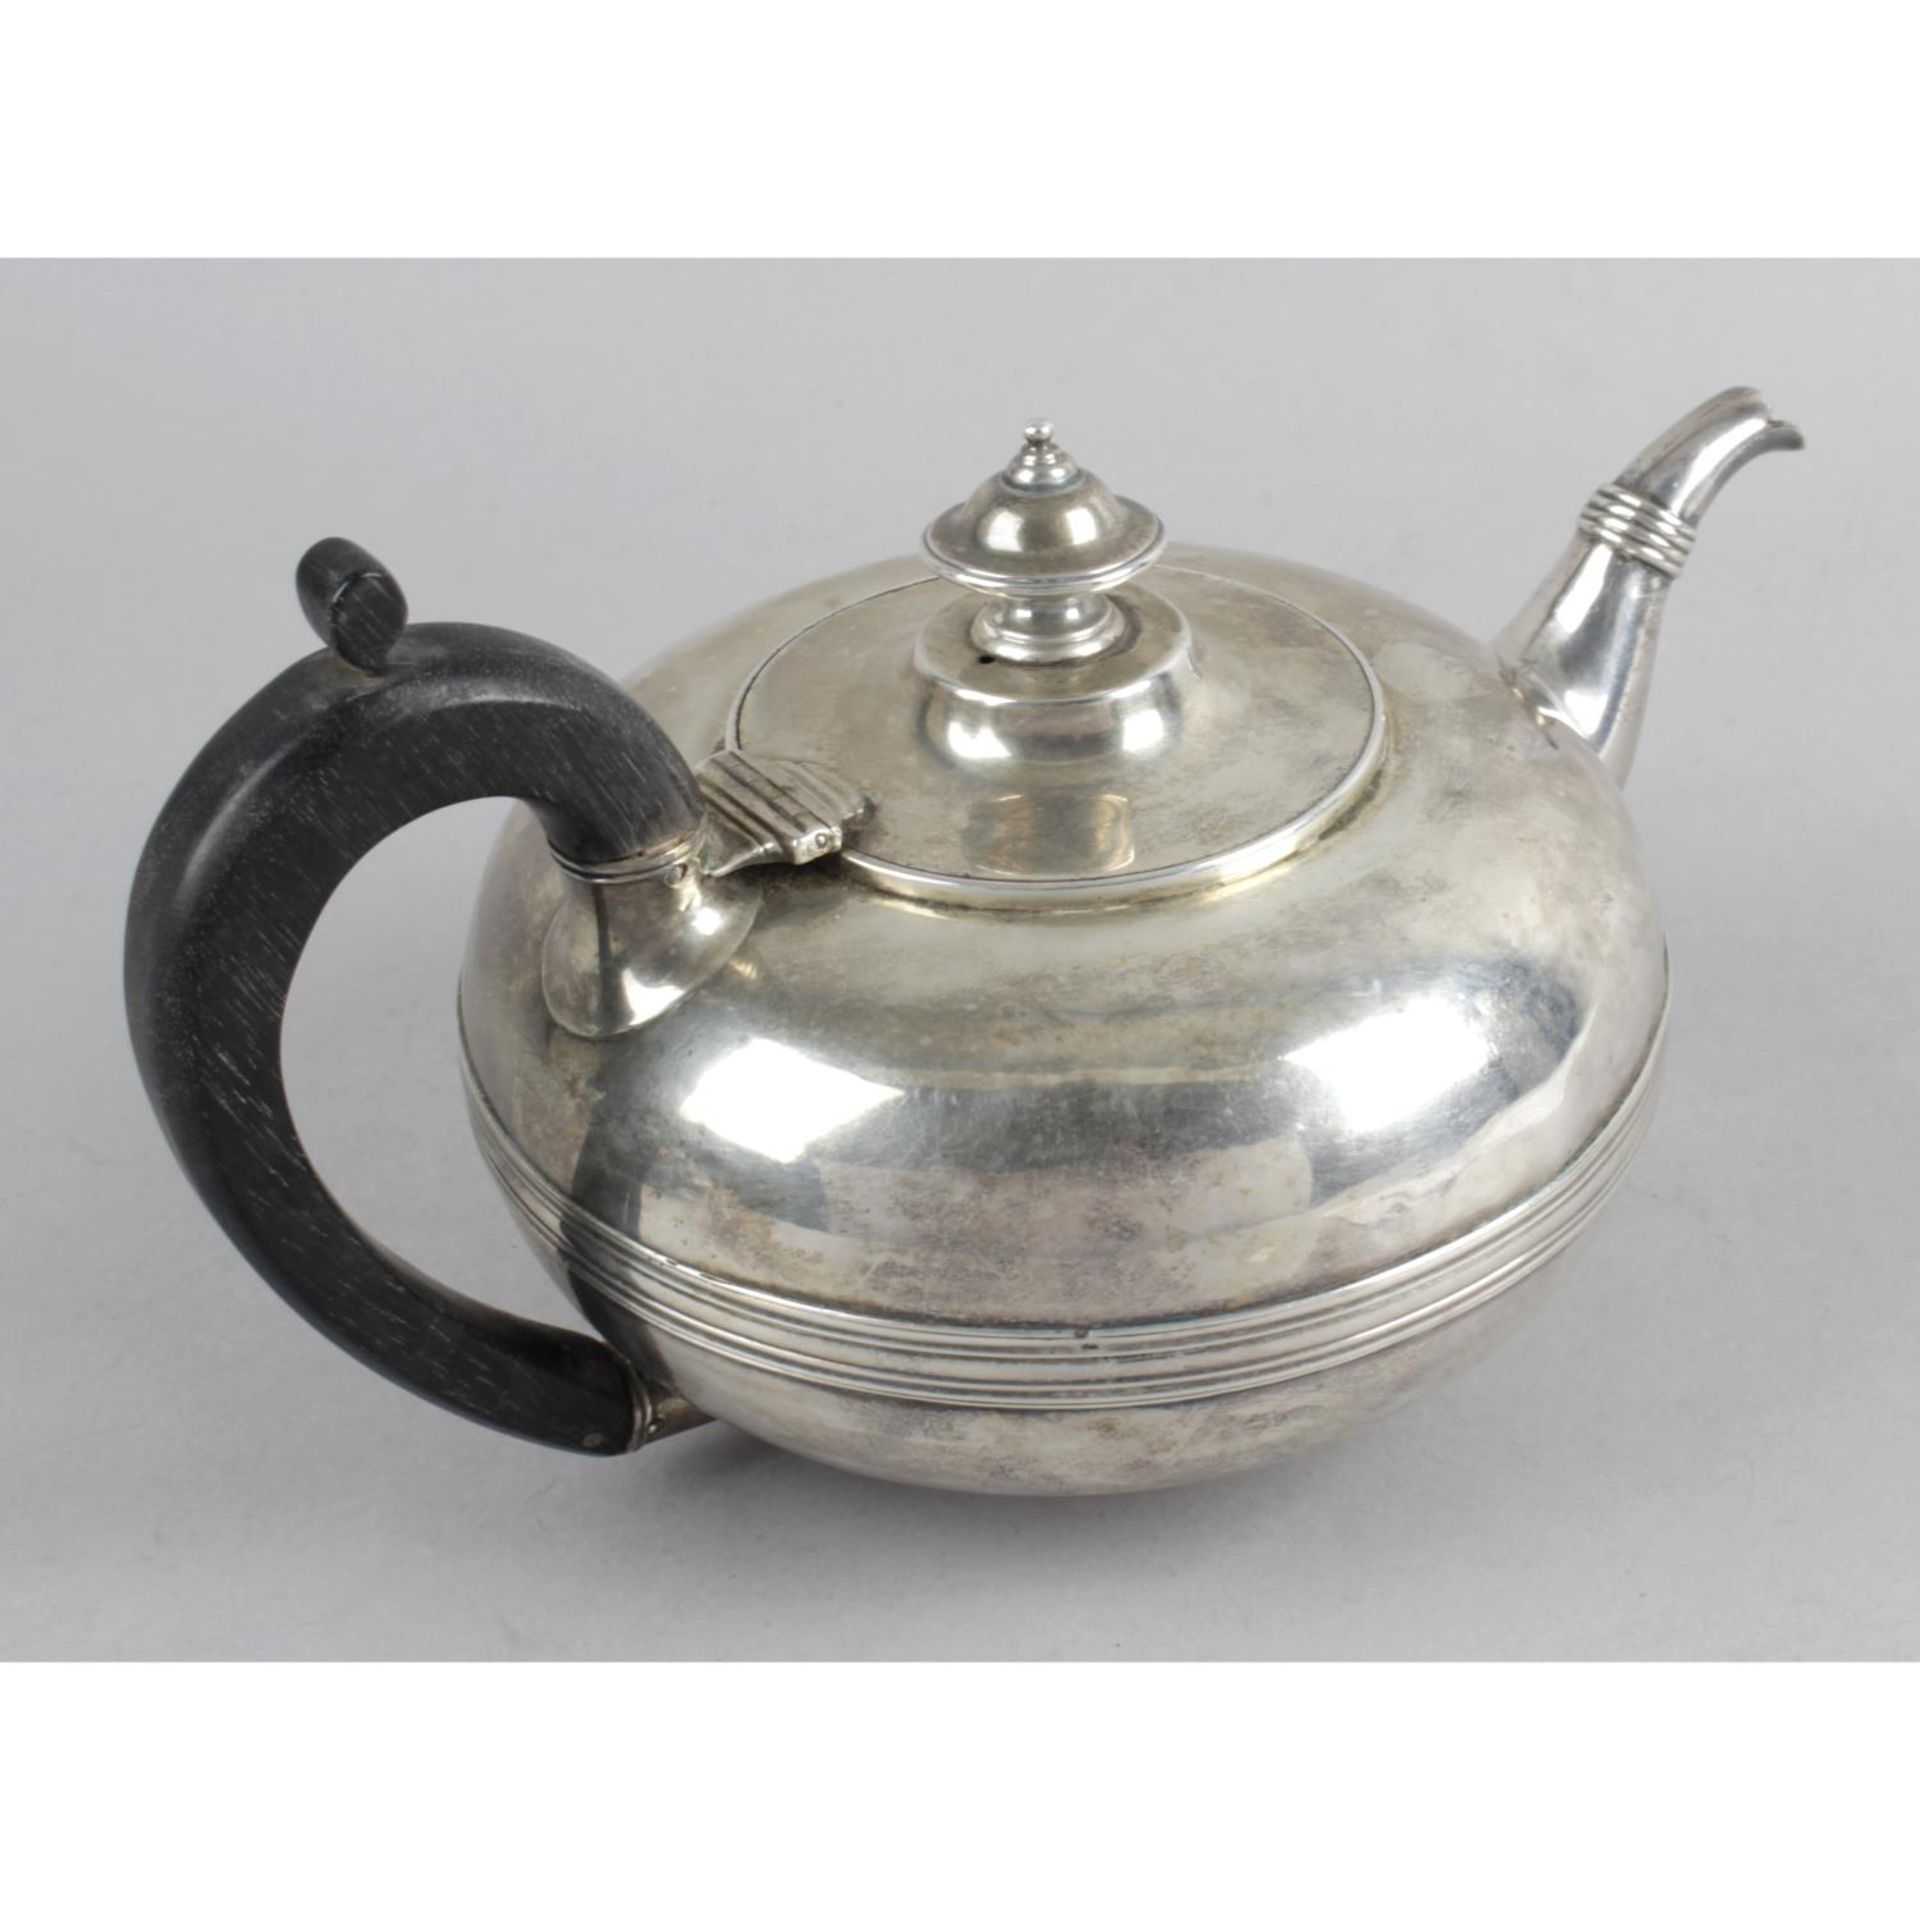 A George IV silver teapot, - Image 2 of 3